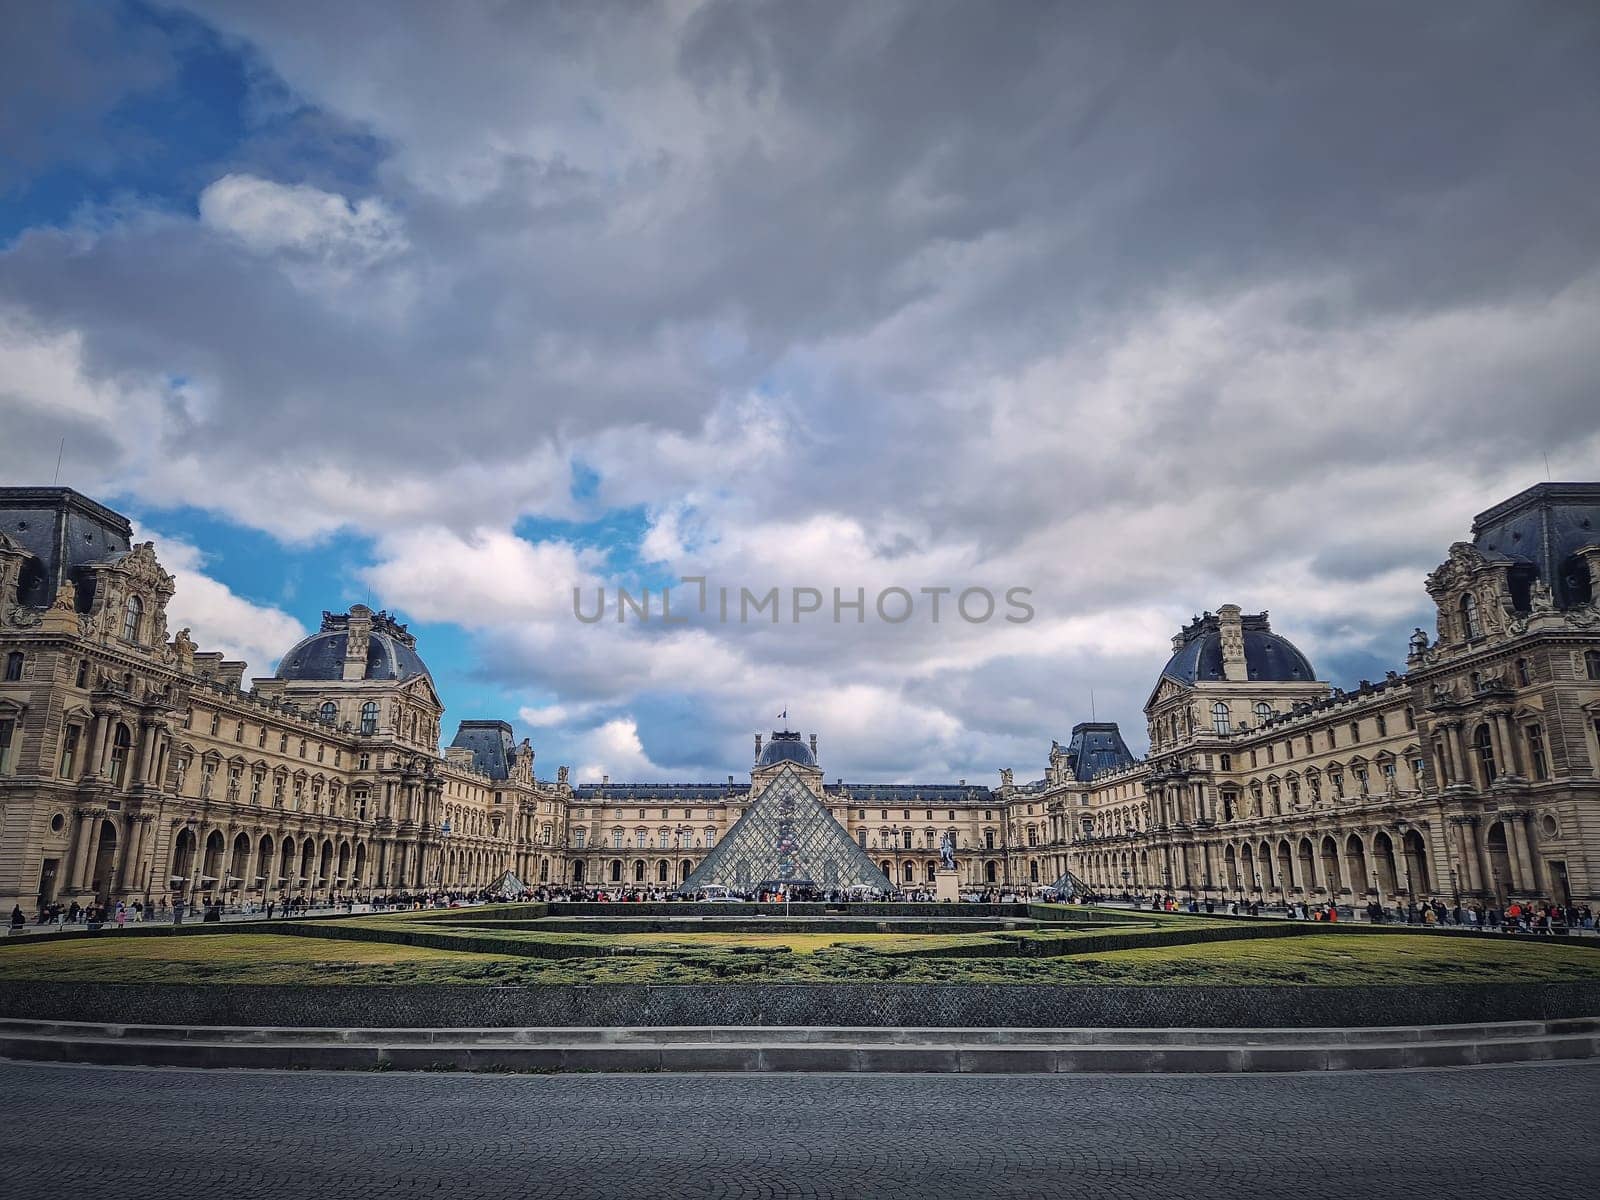 Outdoors view to the Louvre Museum in Paris, France. The historical palace building with the modern glass pyramid in center by psychoshadow